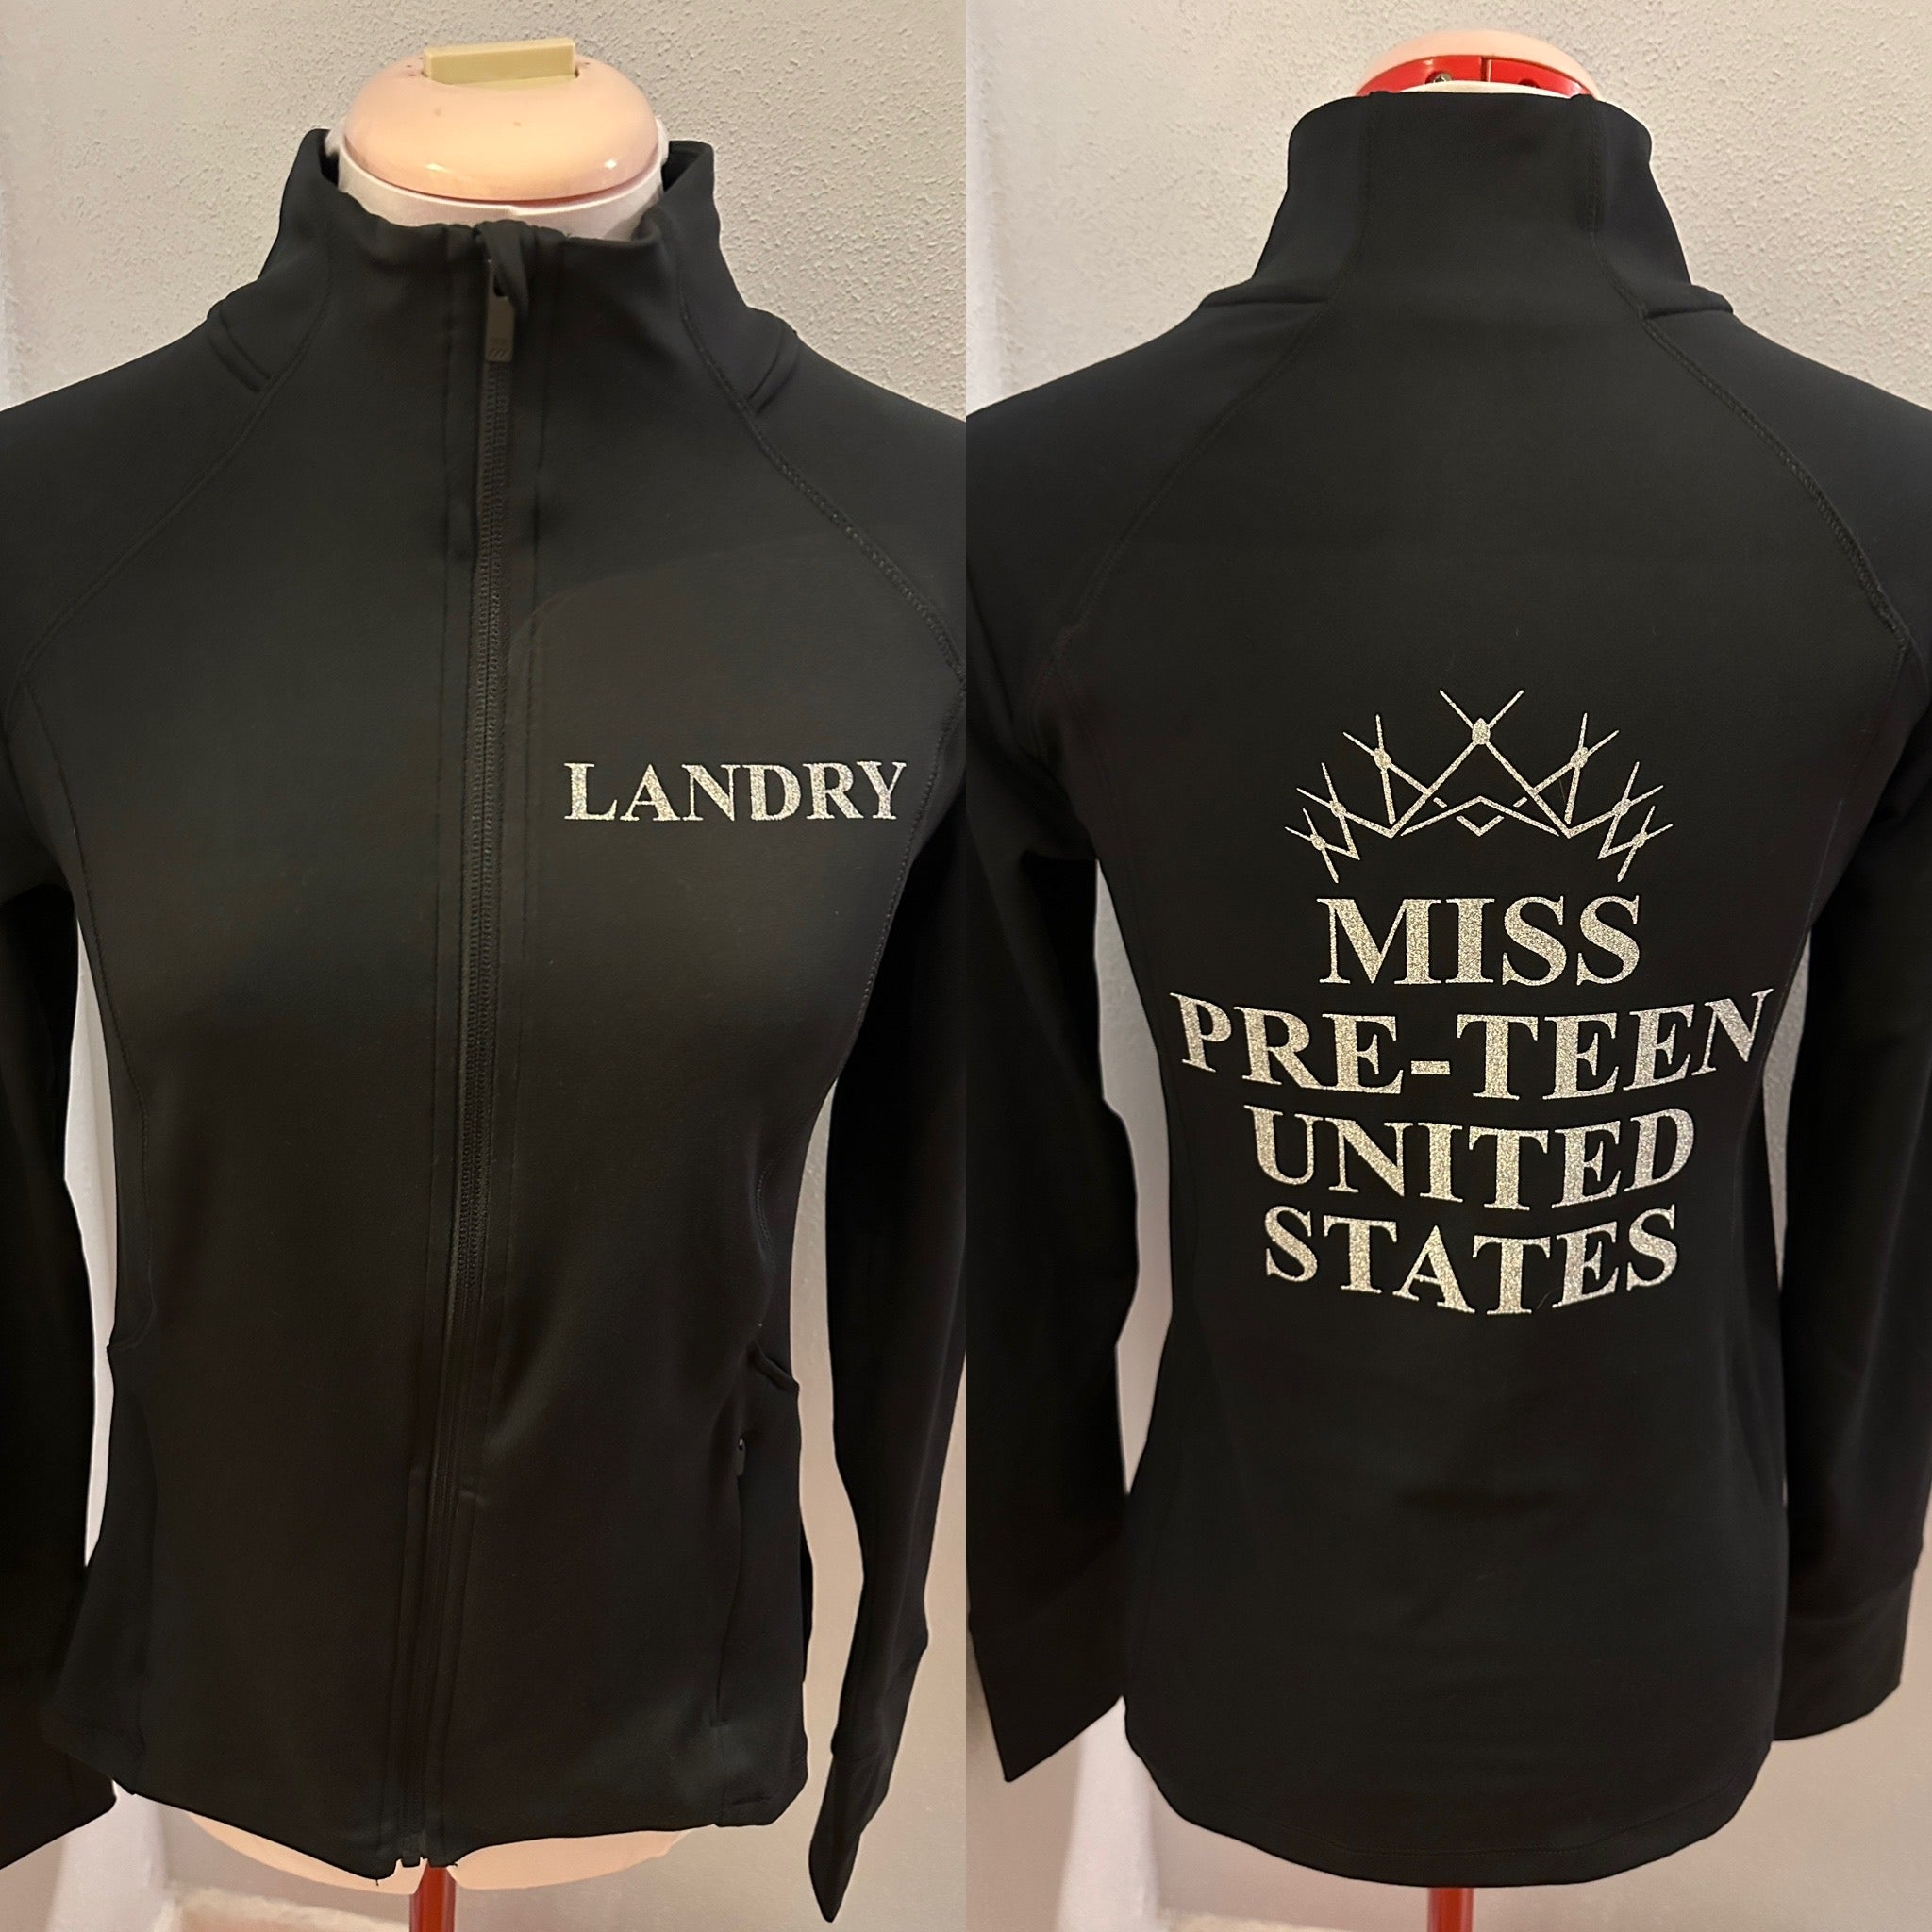 Miss United States Title Jackets